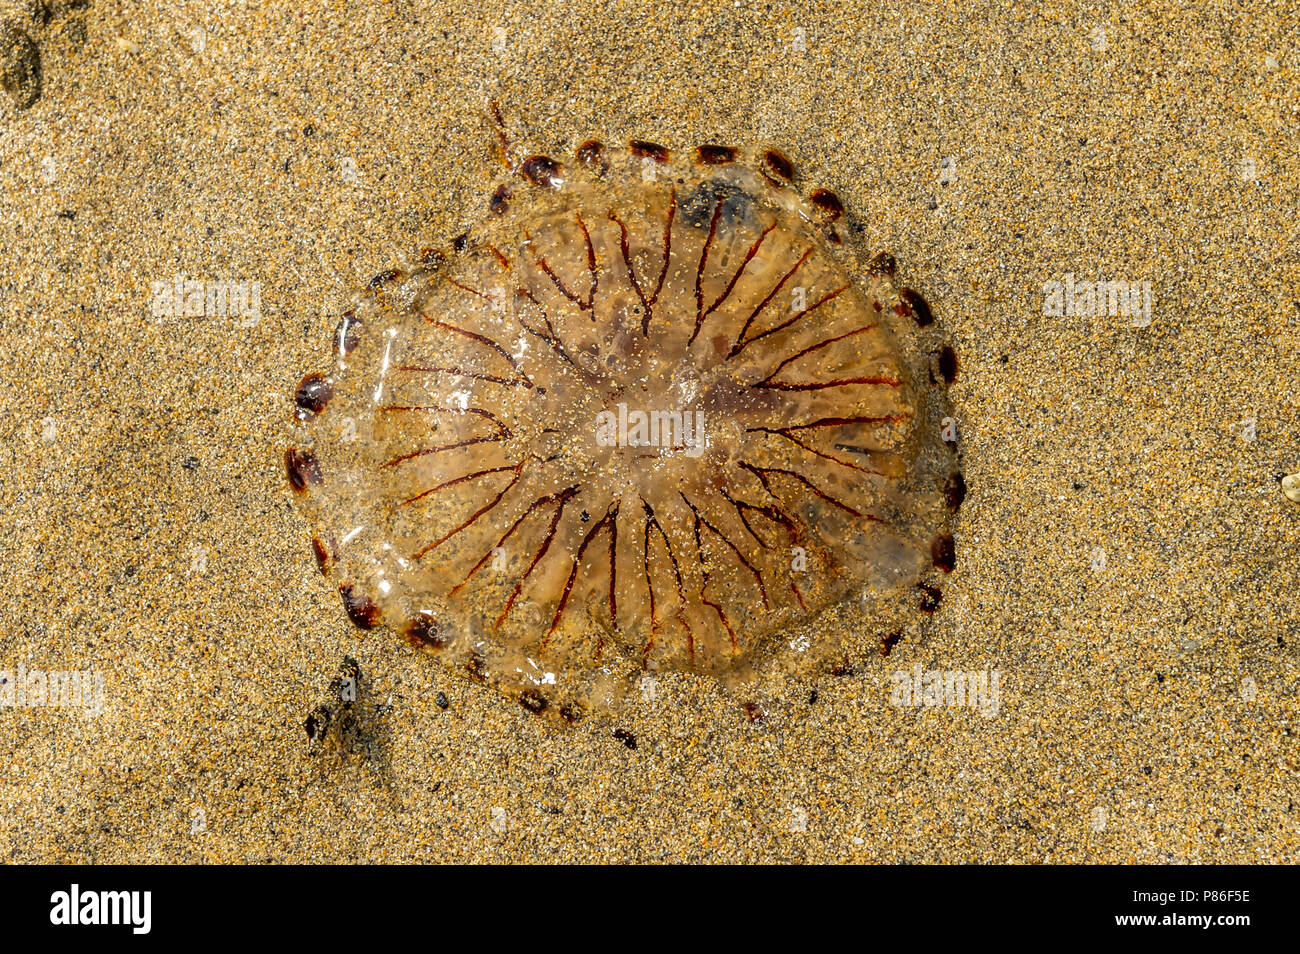 Bantry, Ireland. 9th July, 2018. A Compass Jellyfish 'Chrysaora Hysoscella' washed up on Bantry beach earlier today. Jellyfish are proliferate in Irish waters due to the heat and their mating season. The heatwave is set to continue for the next week with temperatures hovering around the mid to high 20° Celsius mark. Credit: Andy Gibson/Alamy Live News. Stock Photo